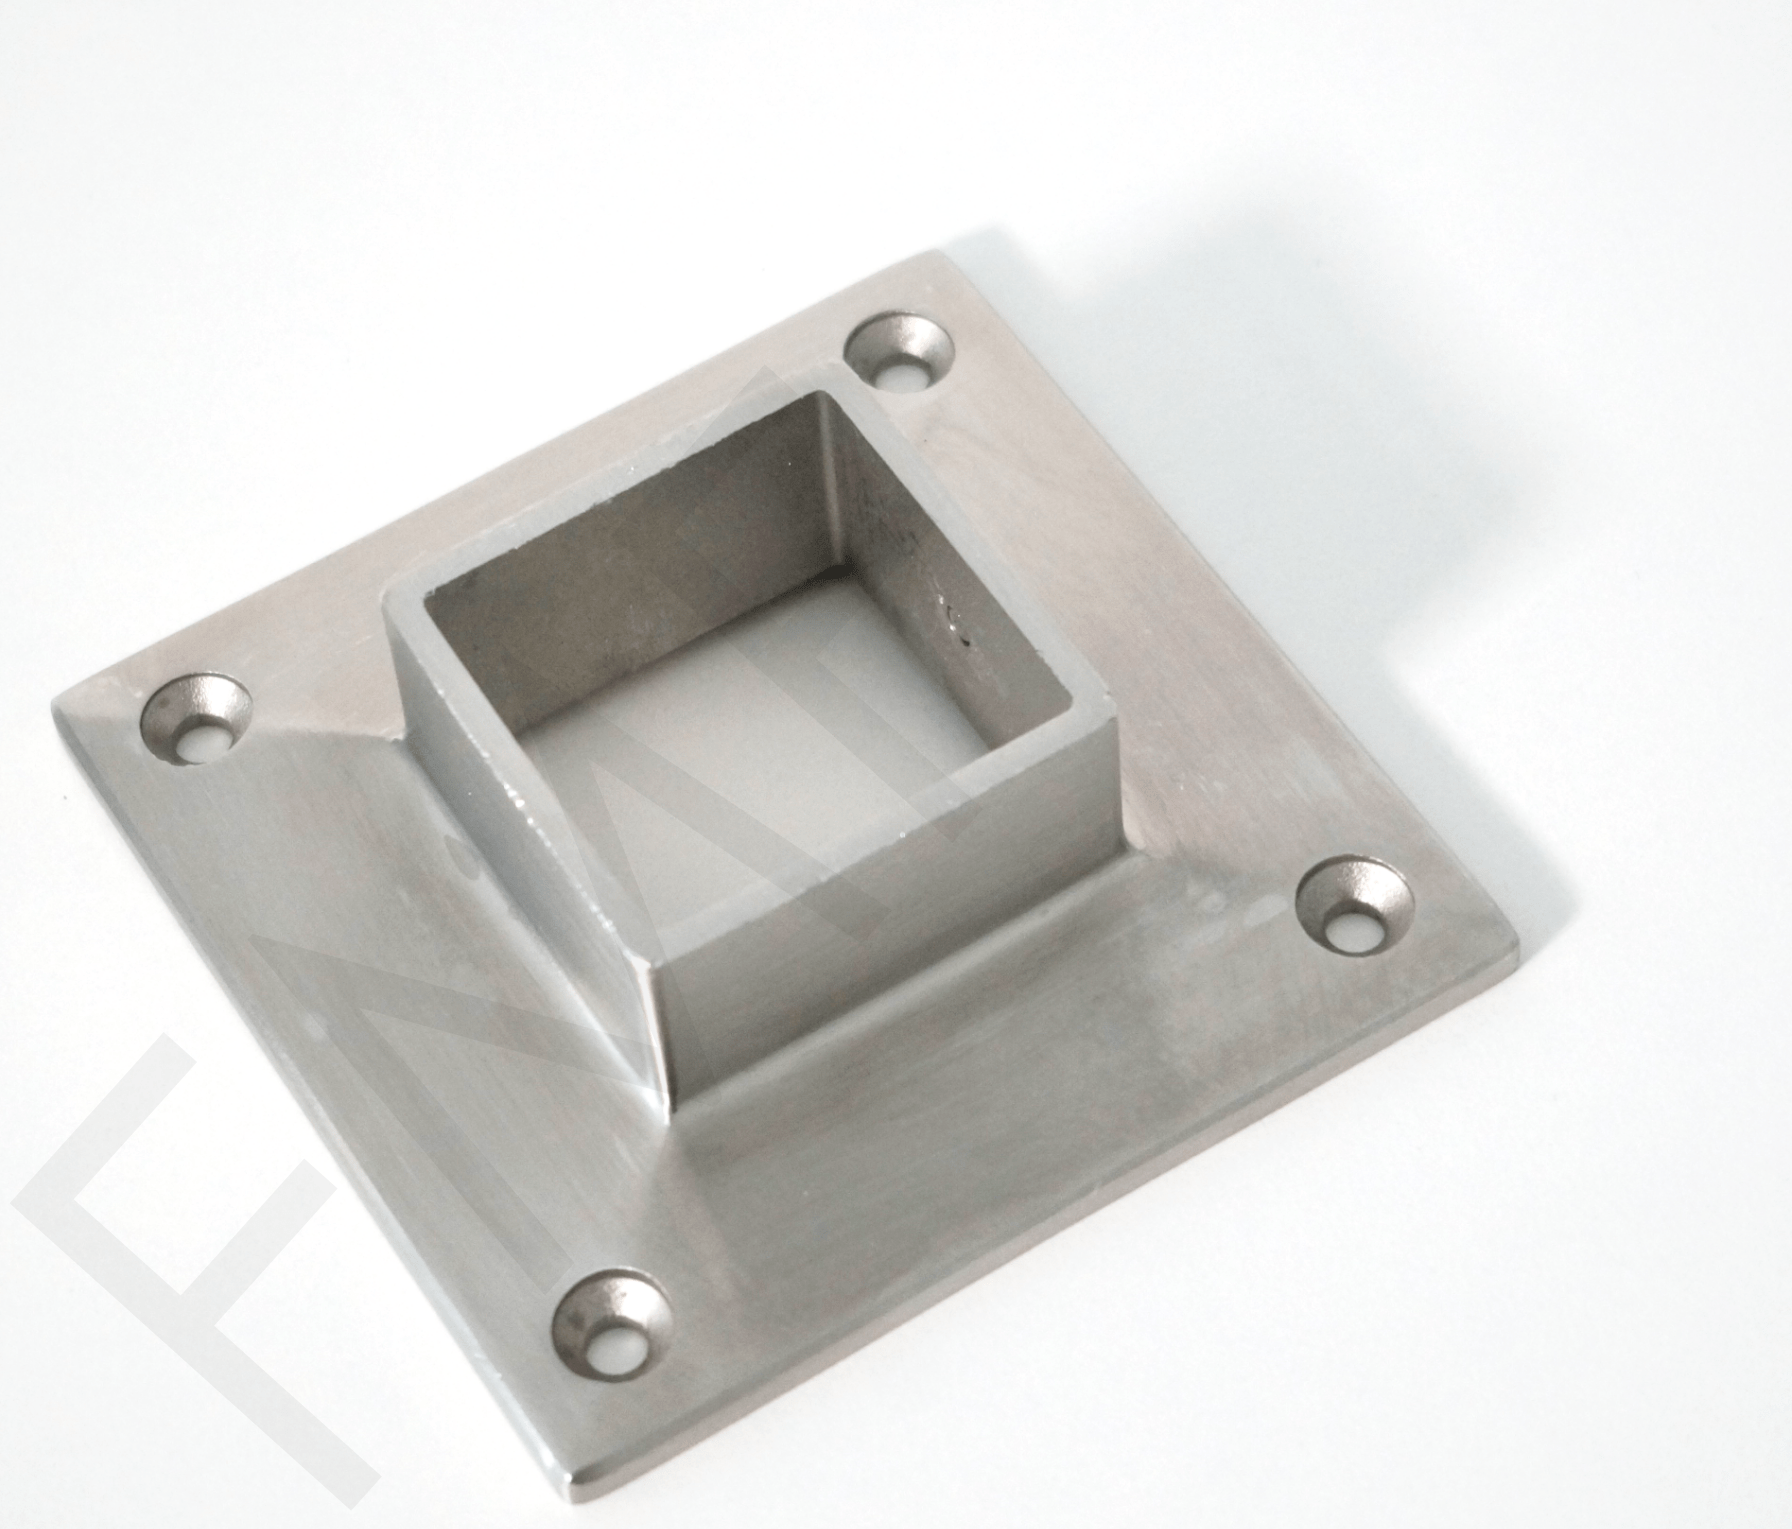 Flange Disc for 40x40mm Square Handrail